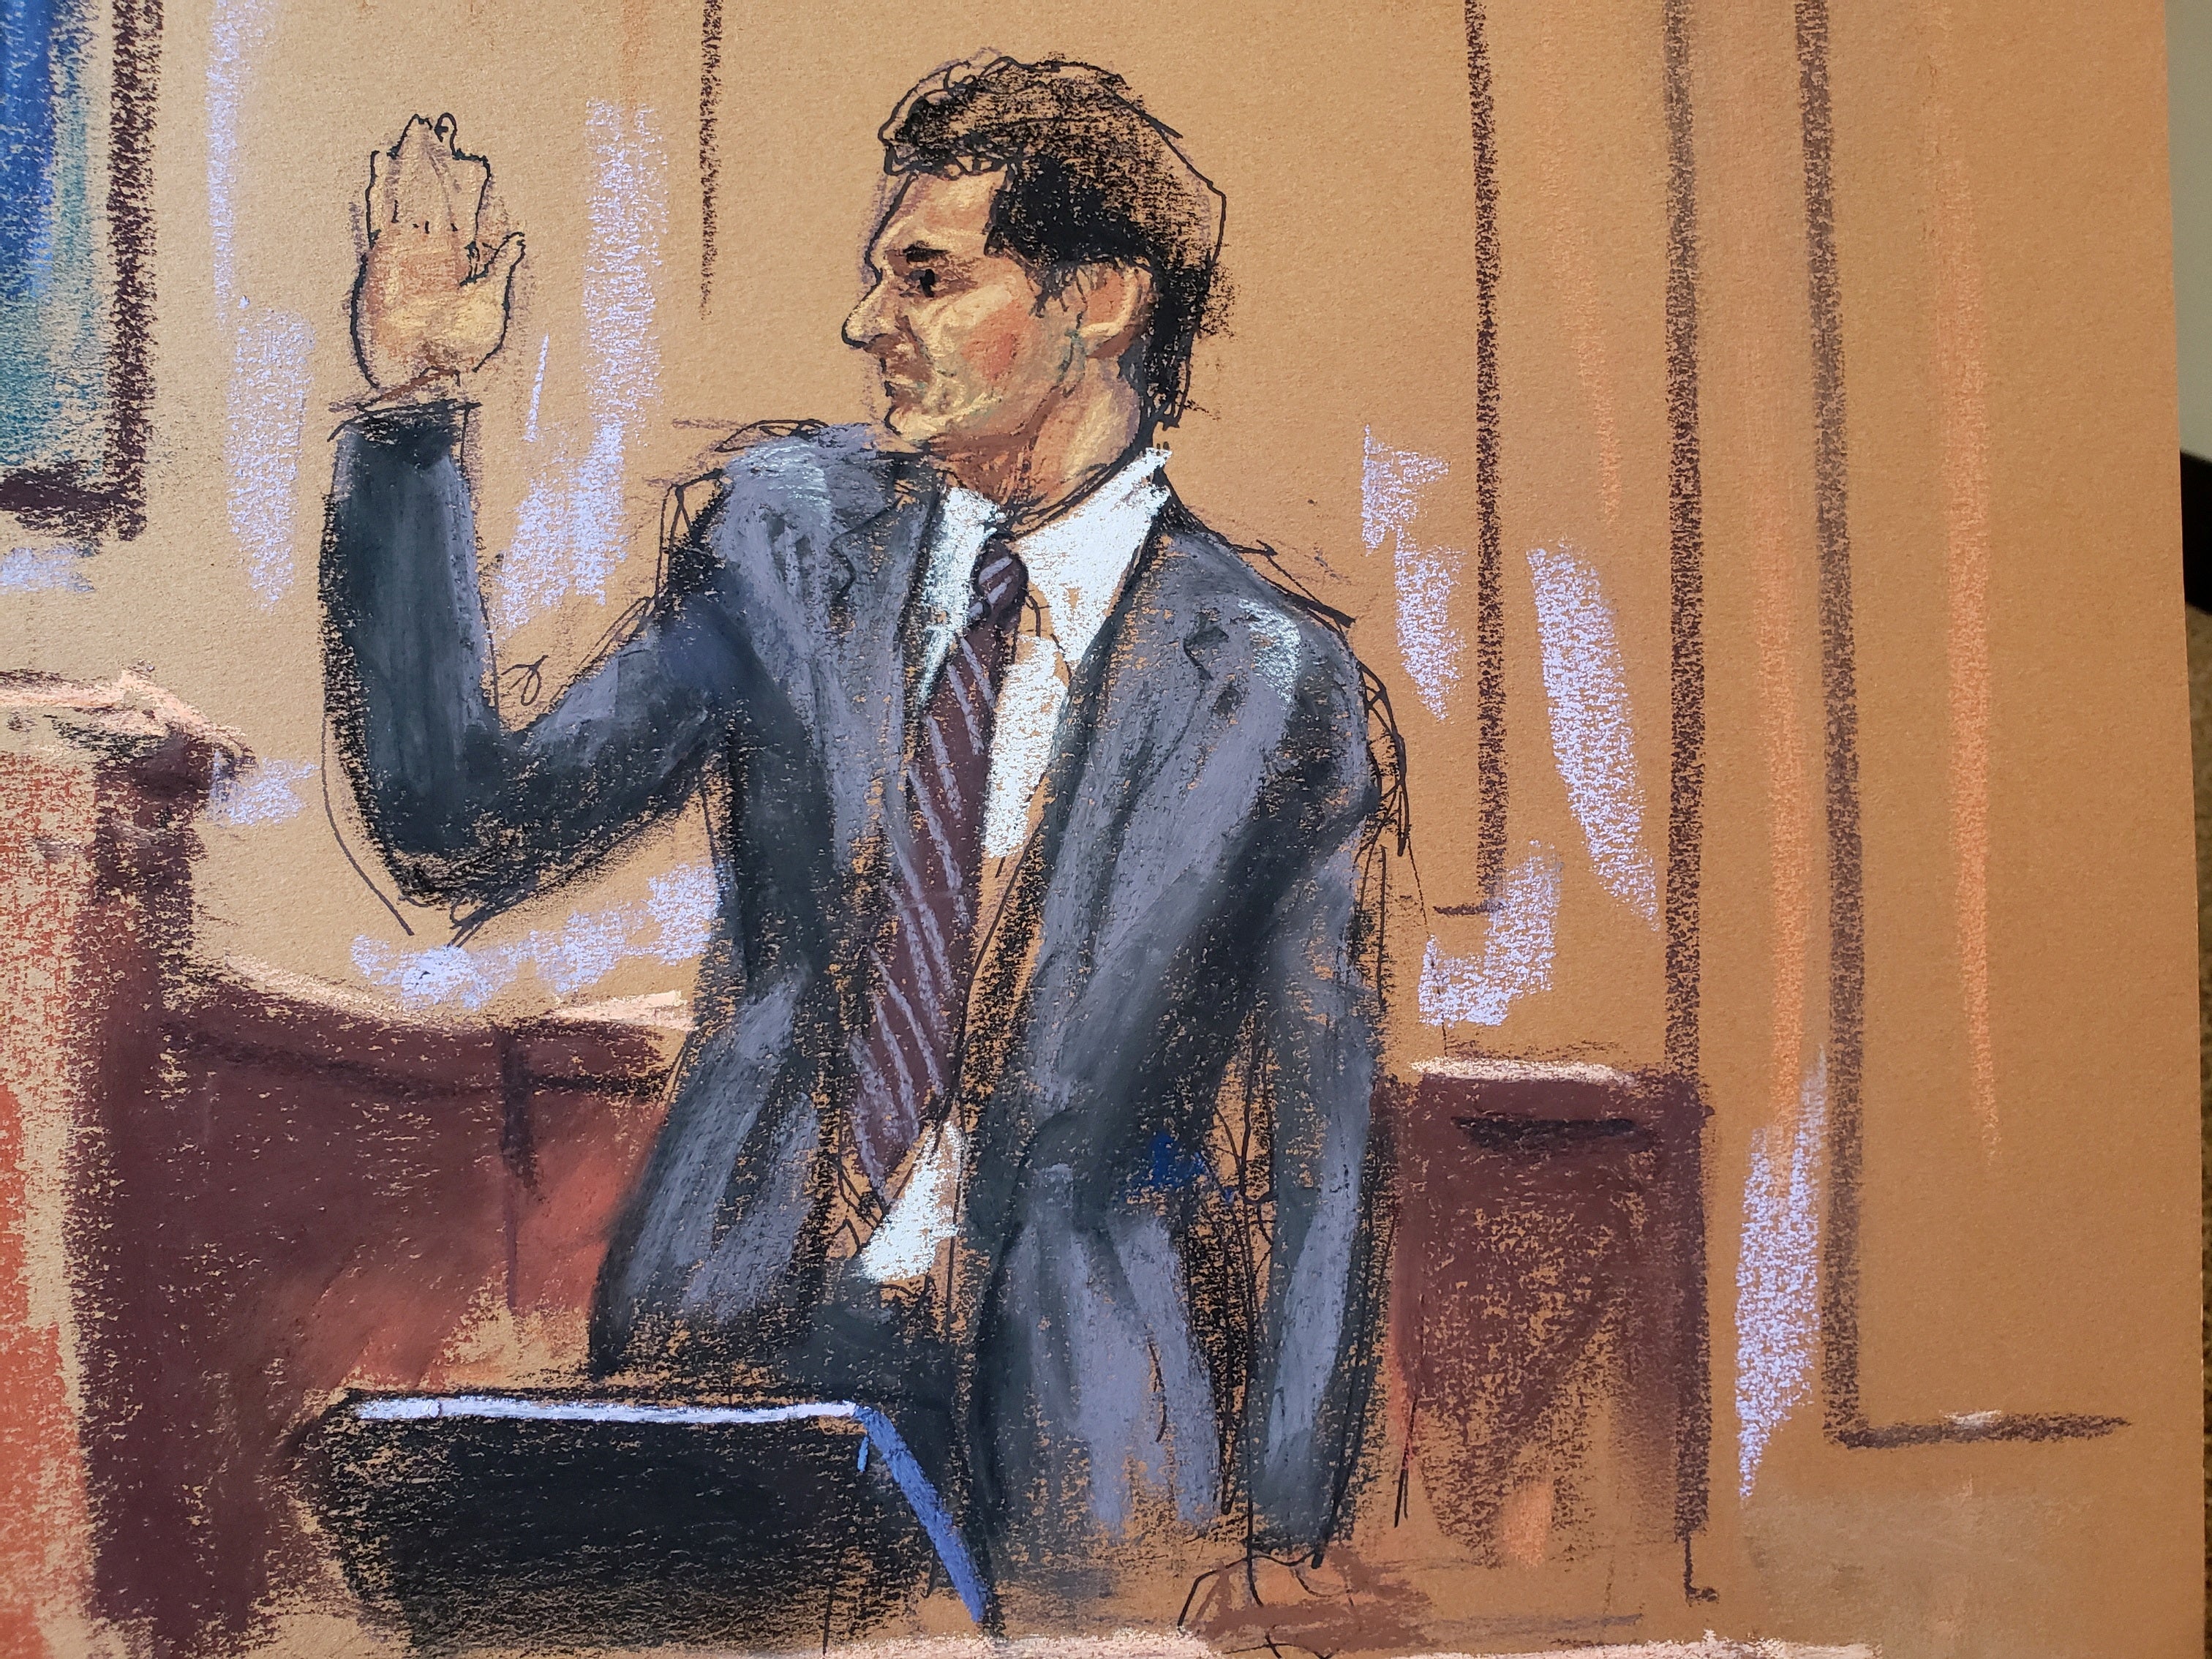 Sam Bankman-Fried is sworn in as he testifies in his fraud trial over the collapse of the bankrupt cryptocurrency exchange FTX, at federal court in New York on 27 October